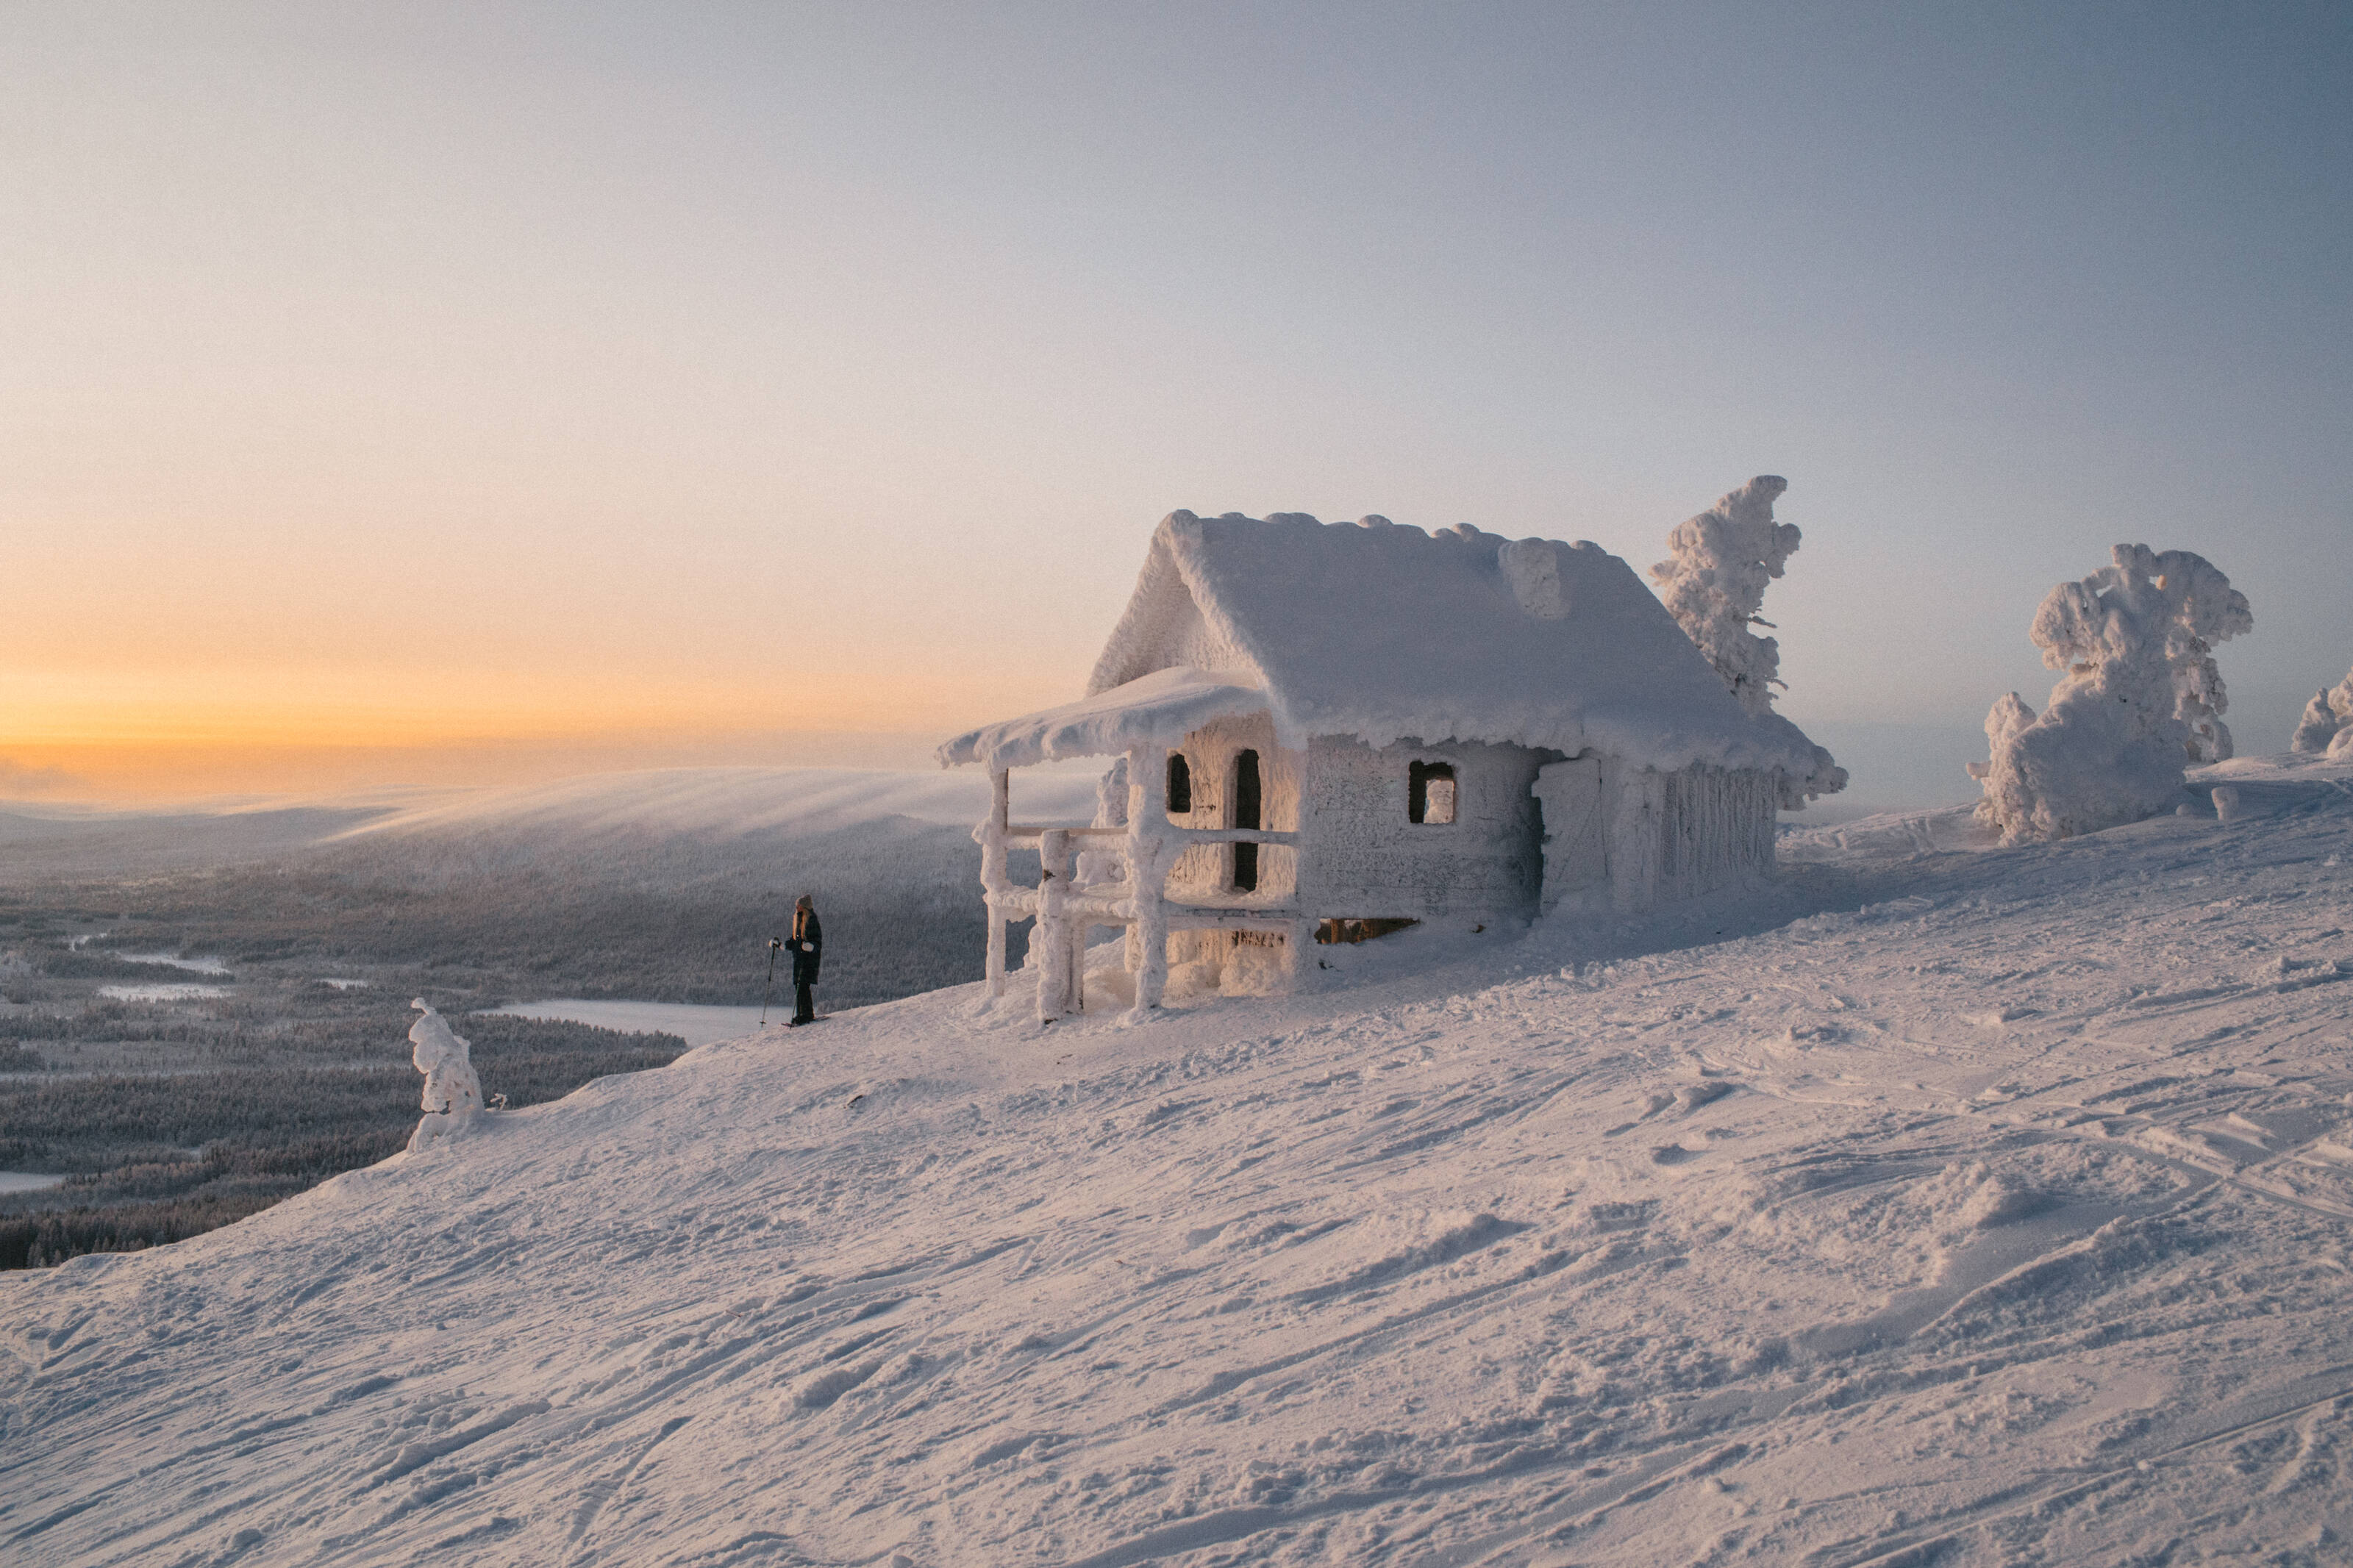 A snowshoer next to a hut completely covered in ice and snow on top of a fell.